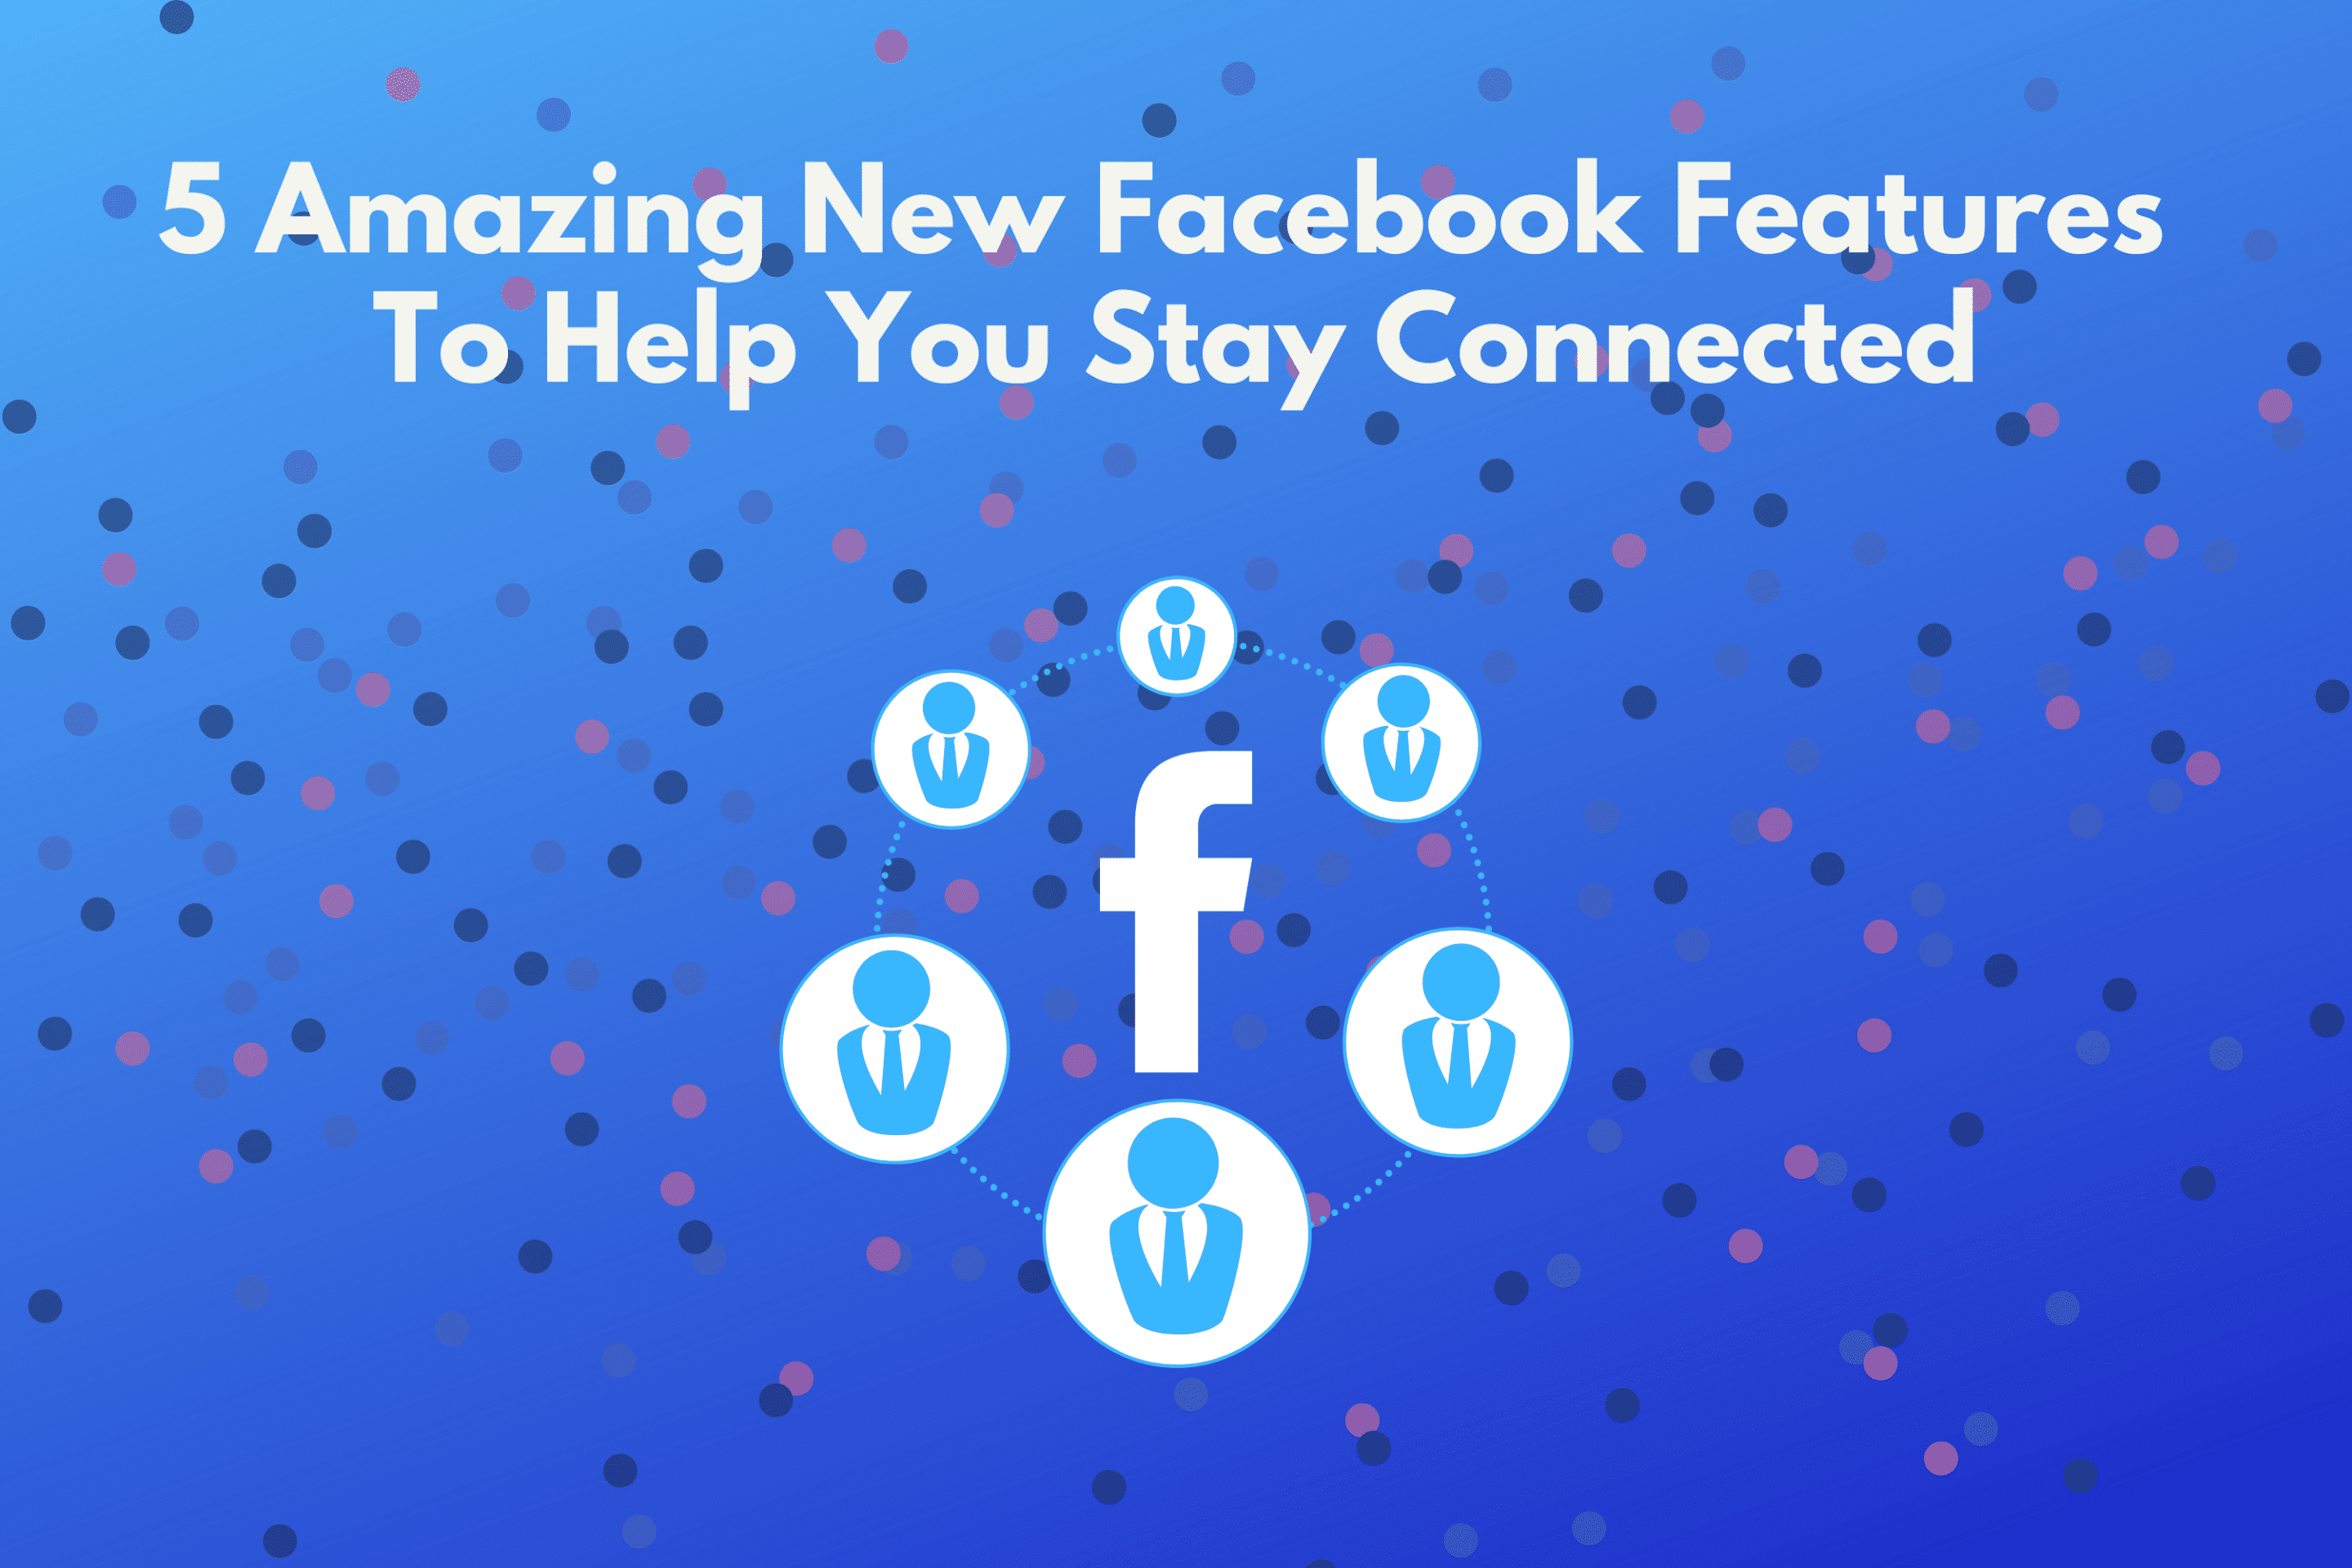 5 Amazing New Facebook Features To Help You Stay Connected